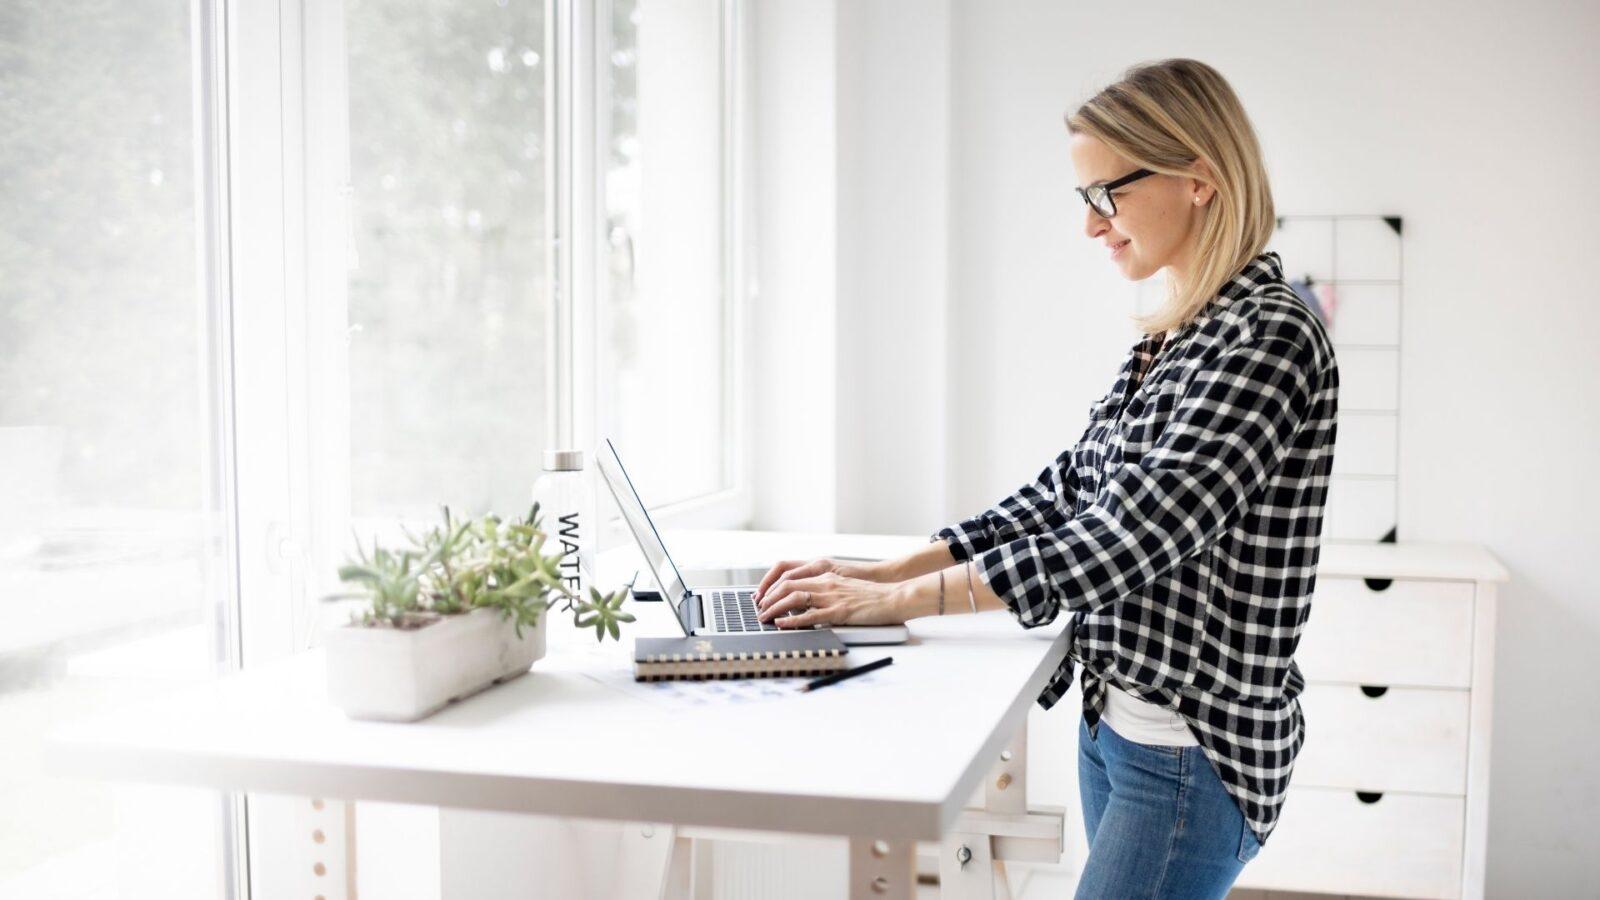 Standing desks can help your back